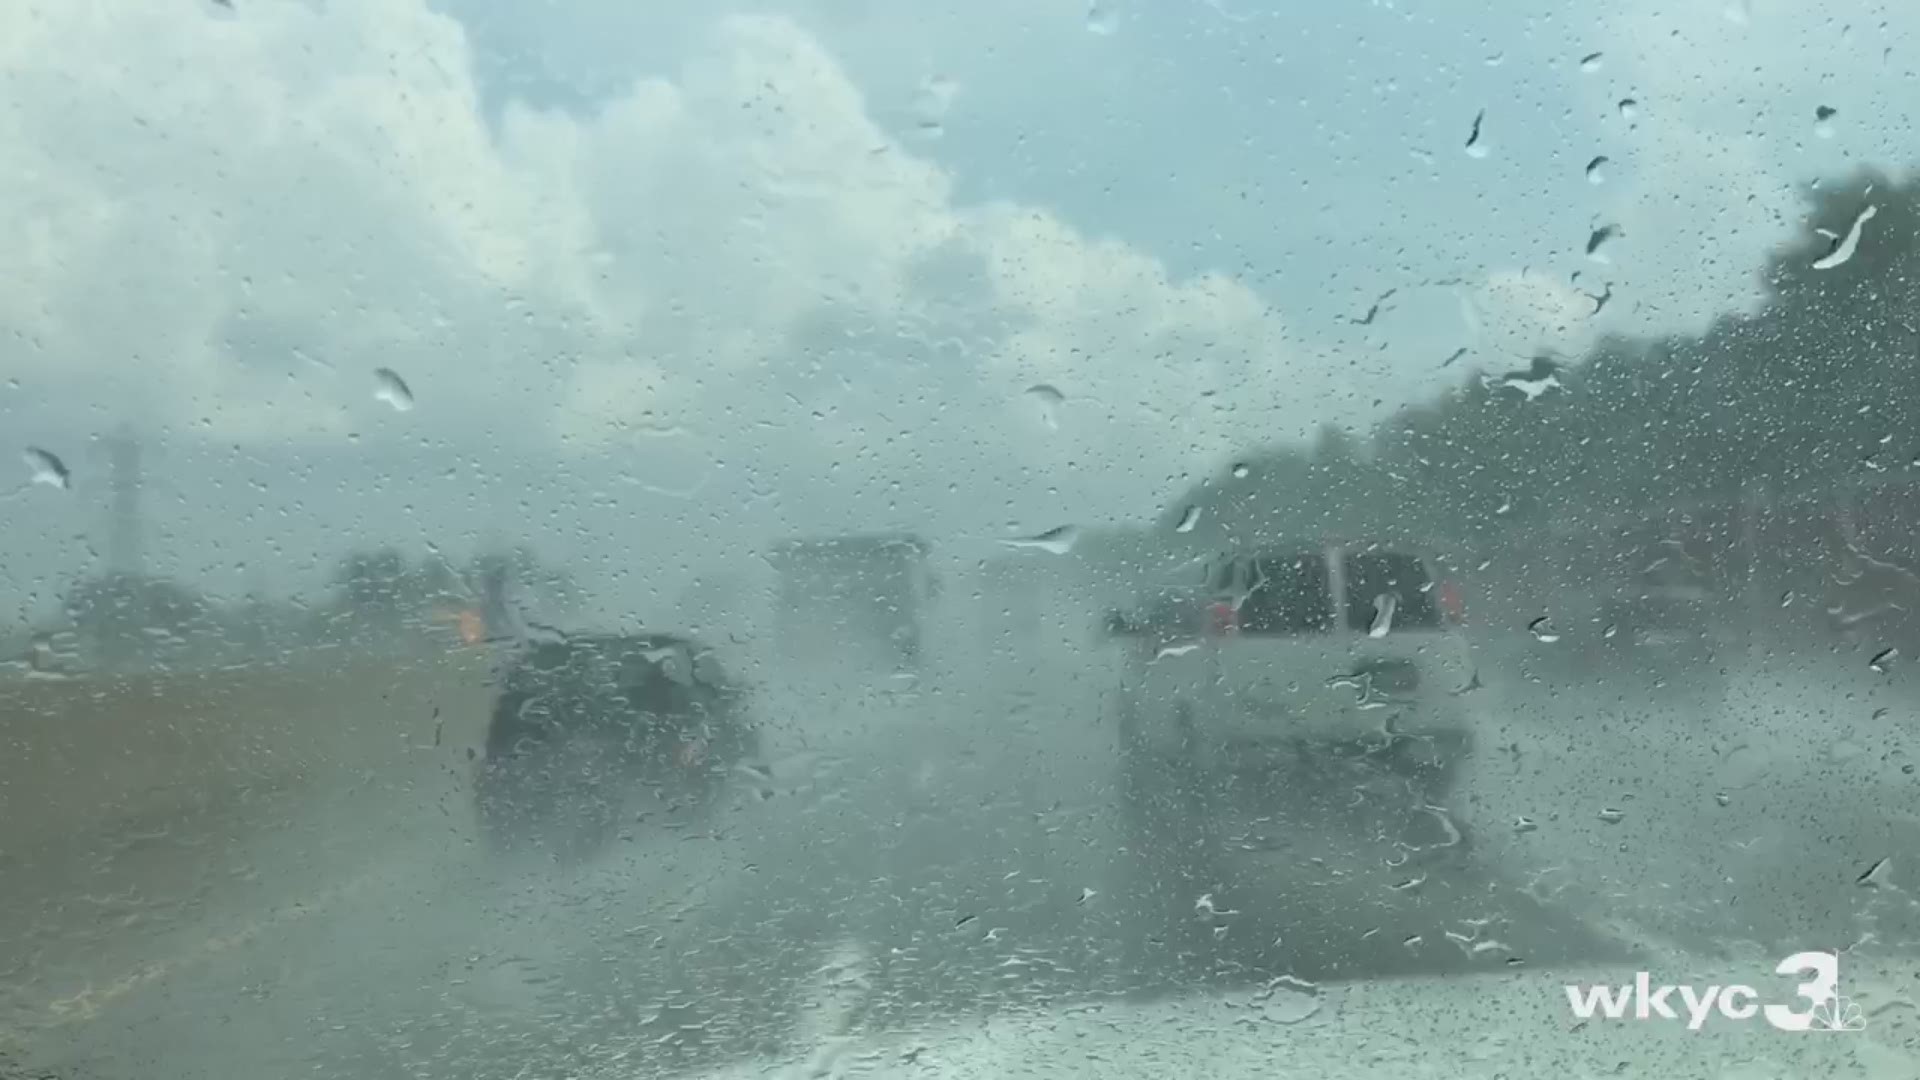 Some areas have been lucky enough to get some rain this afternoon. WKYC's Craig Roberson (@CraigWKYC) captured this video earlier south of Independence on his way to Akron on I-77.